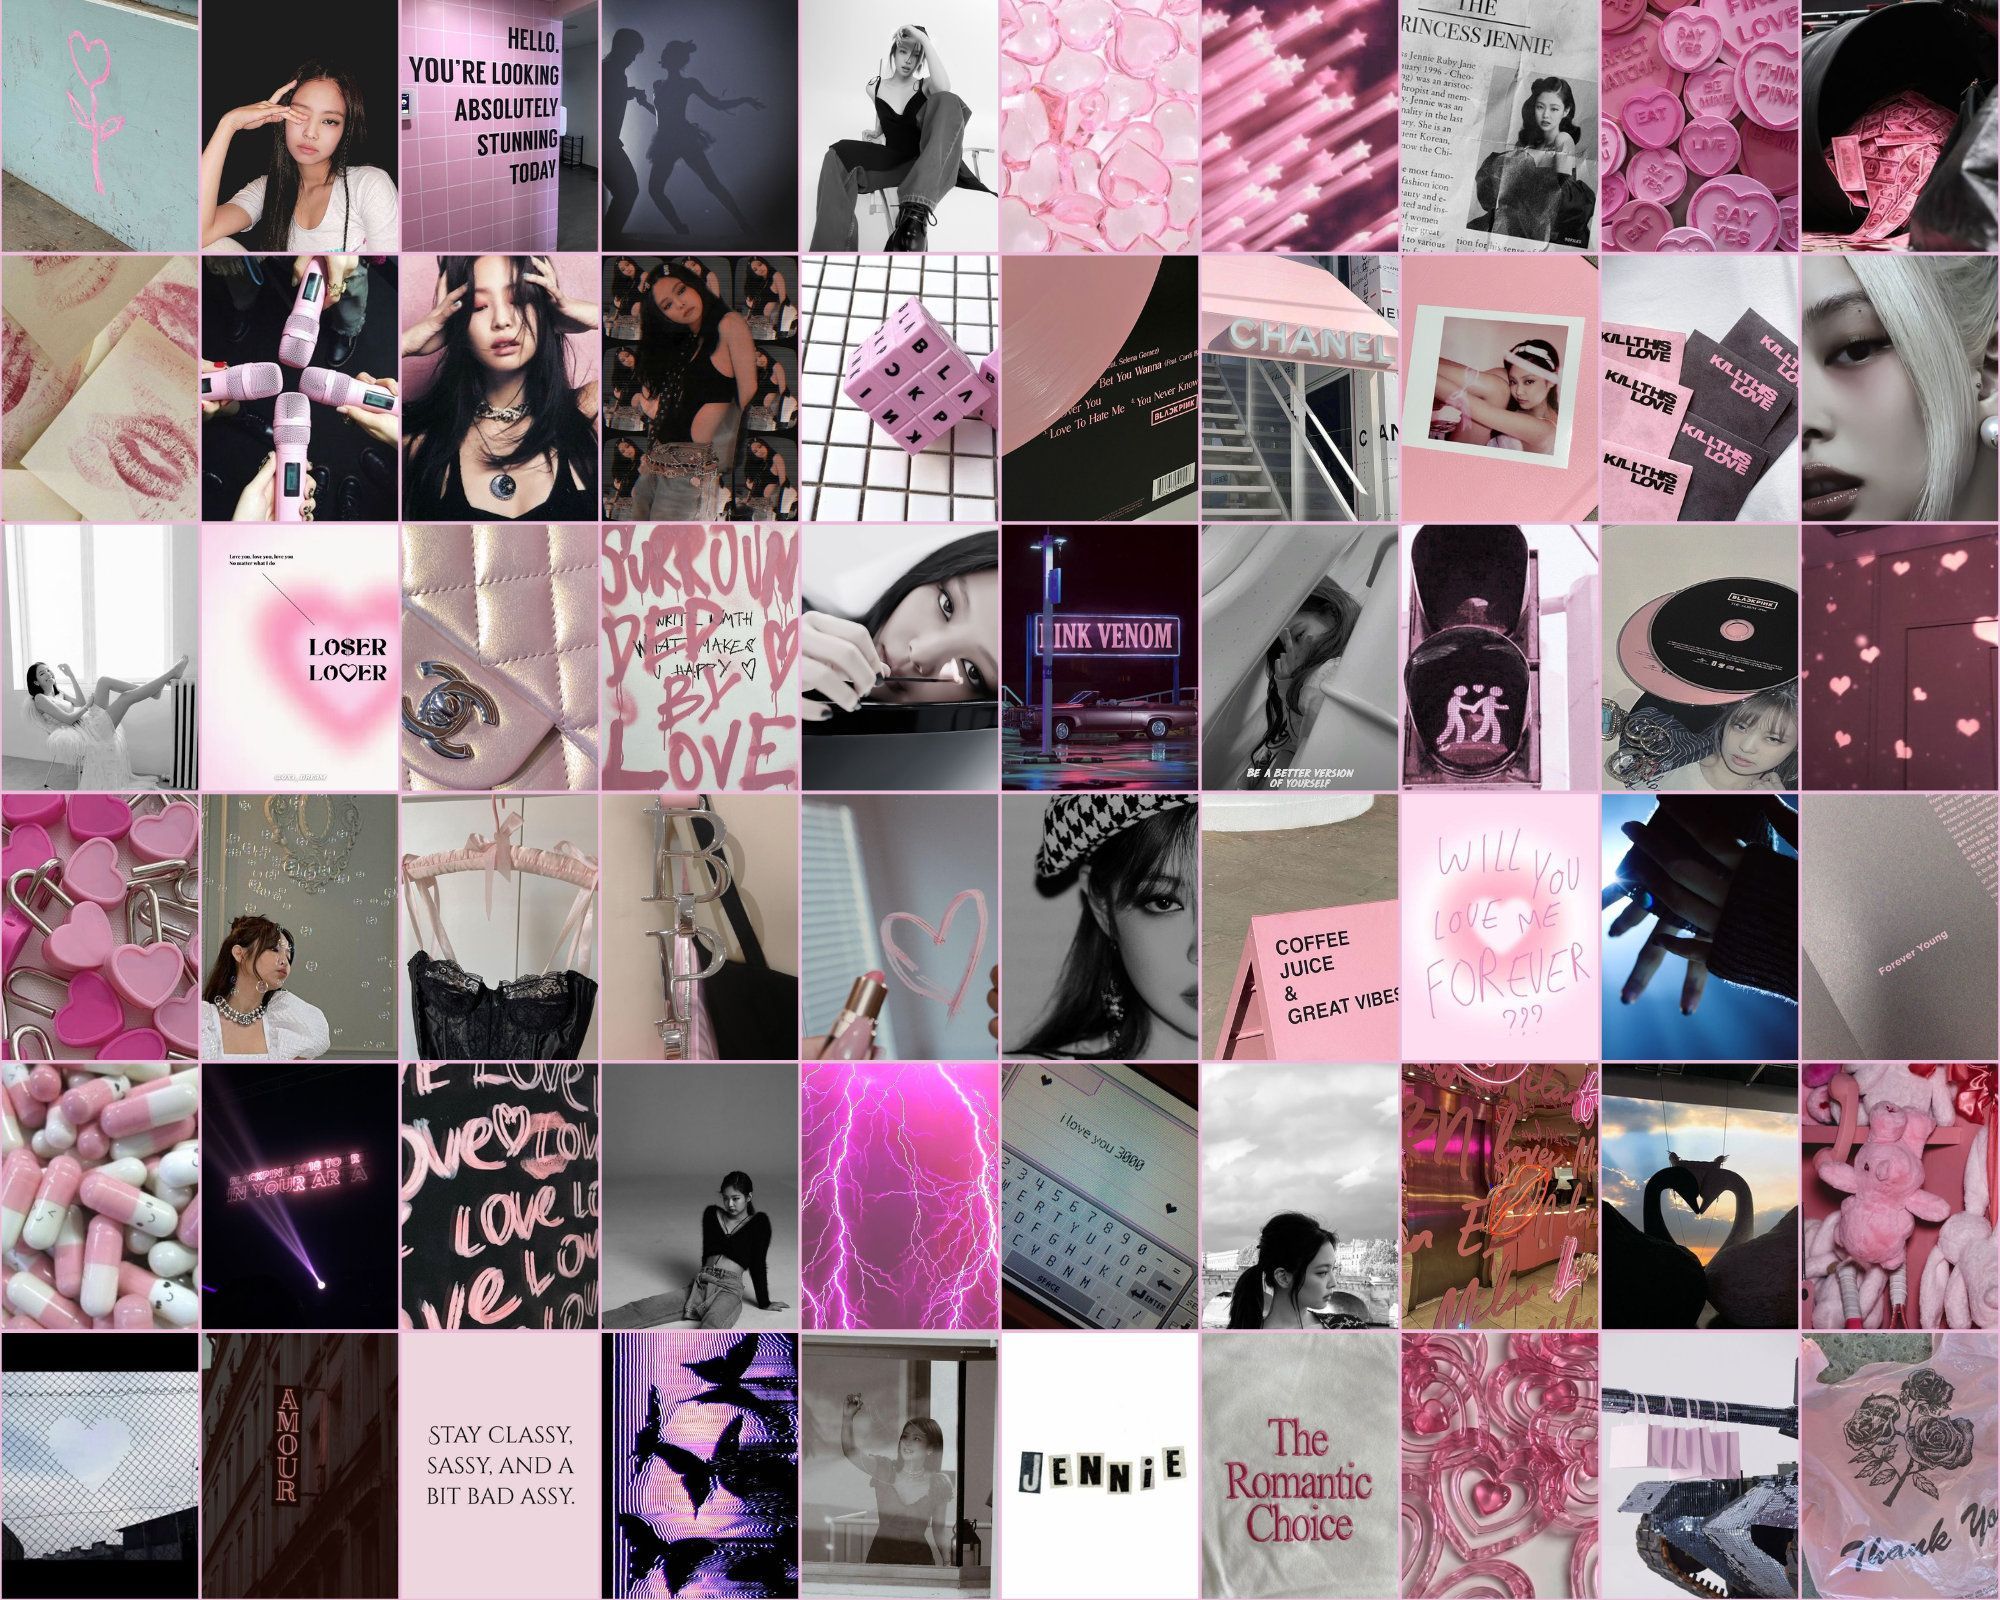 Blackpink Collage Wallpapers - Top Free Blackpink Collage Backgrounds ...